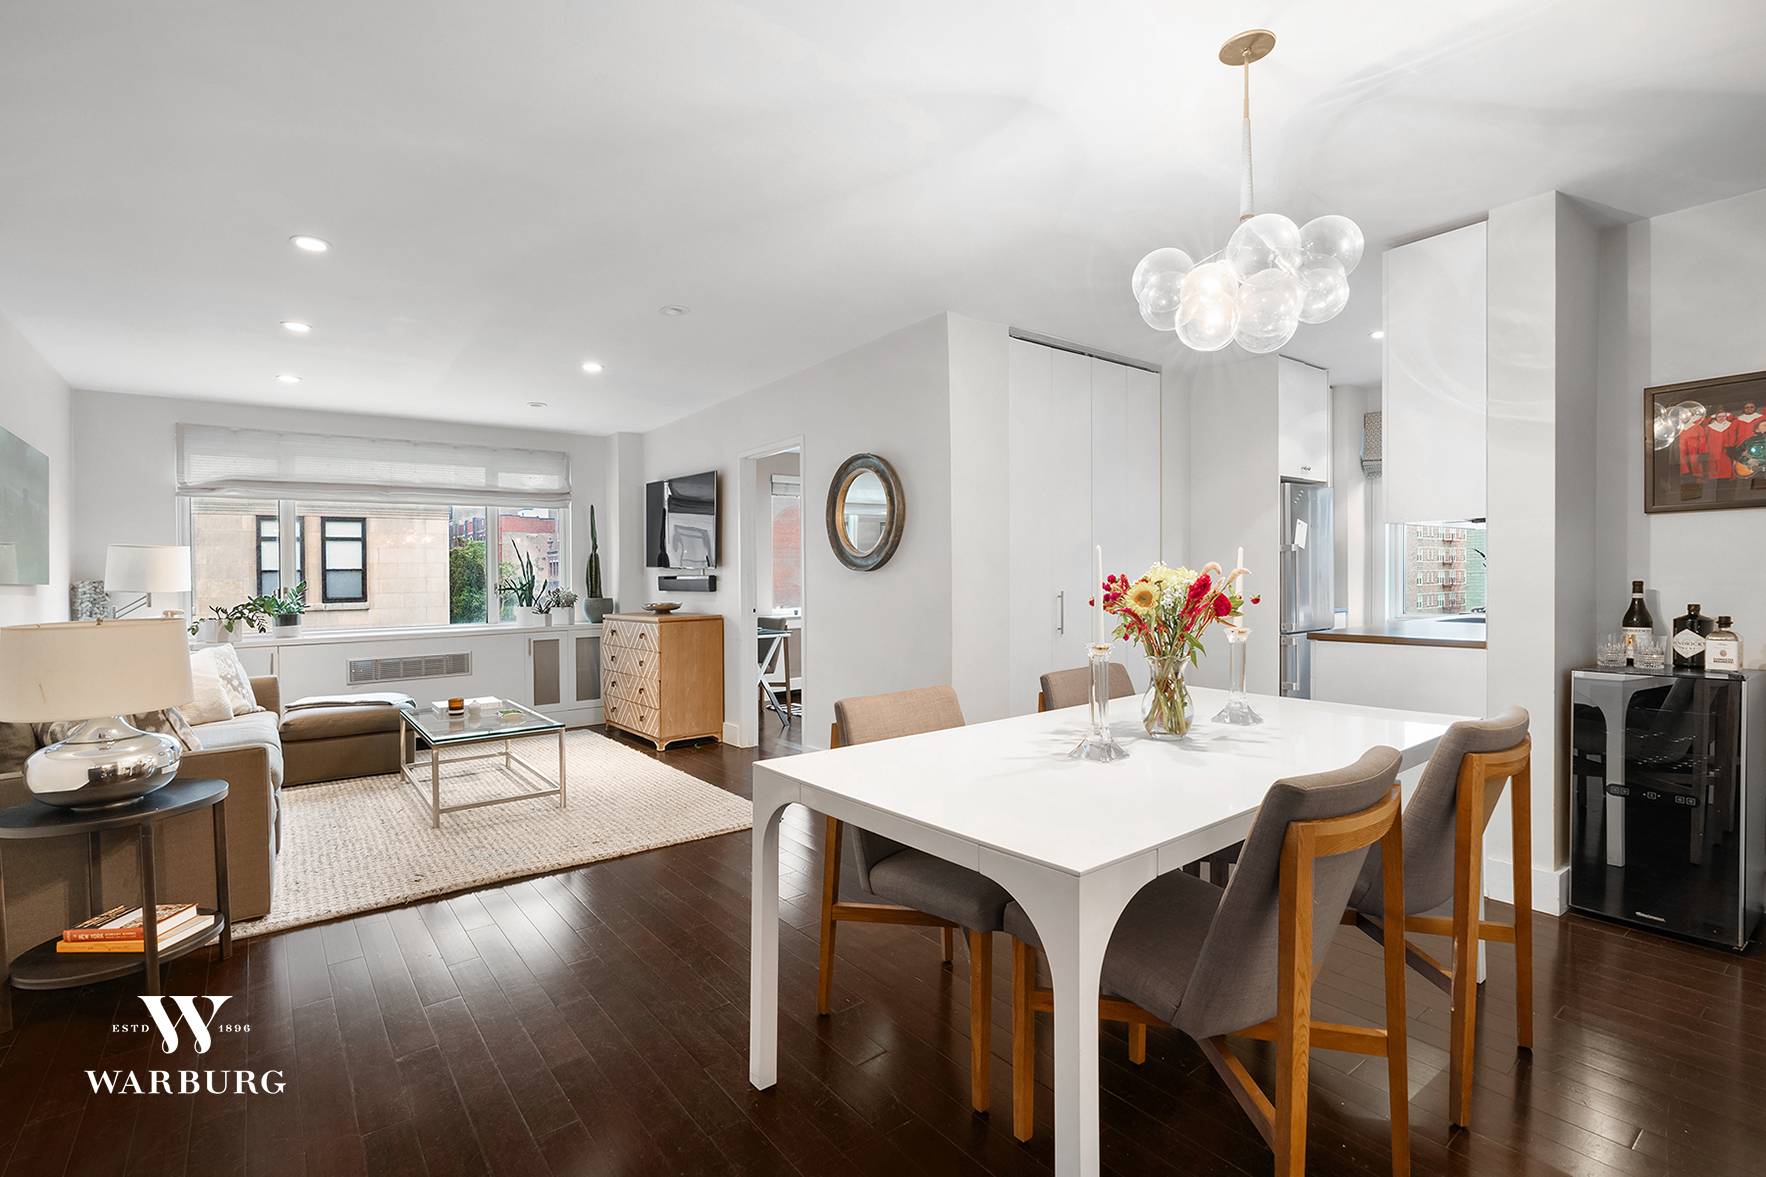 West Village Treasure ! Tucked away on a perfect tree lined residential street in the West Village is Apartment 5C, a spacious and charming 2 bedroom, 1.